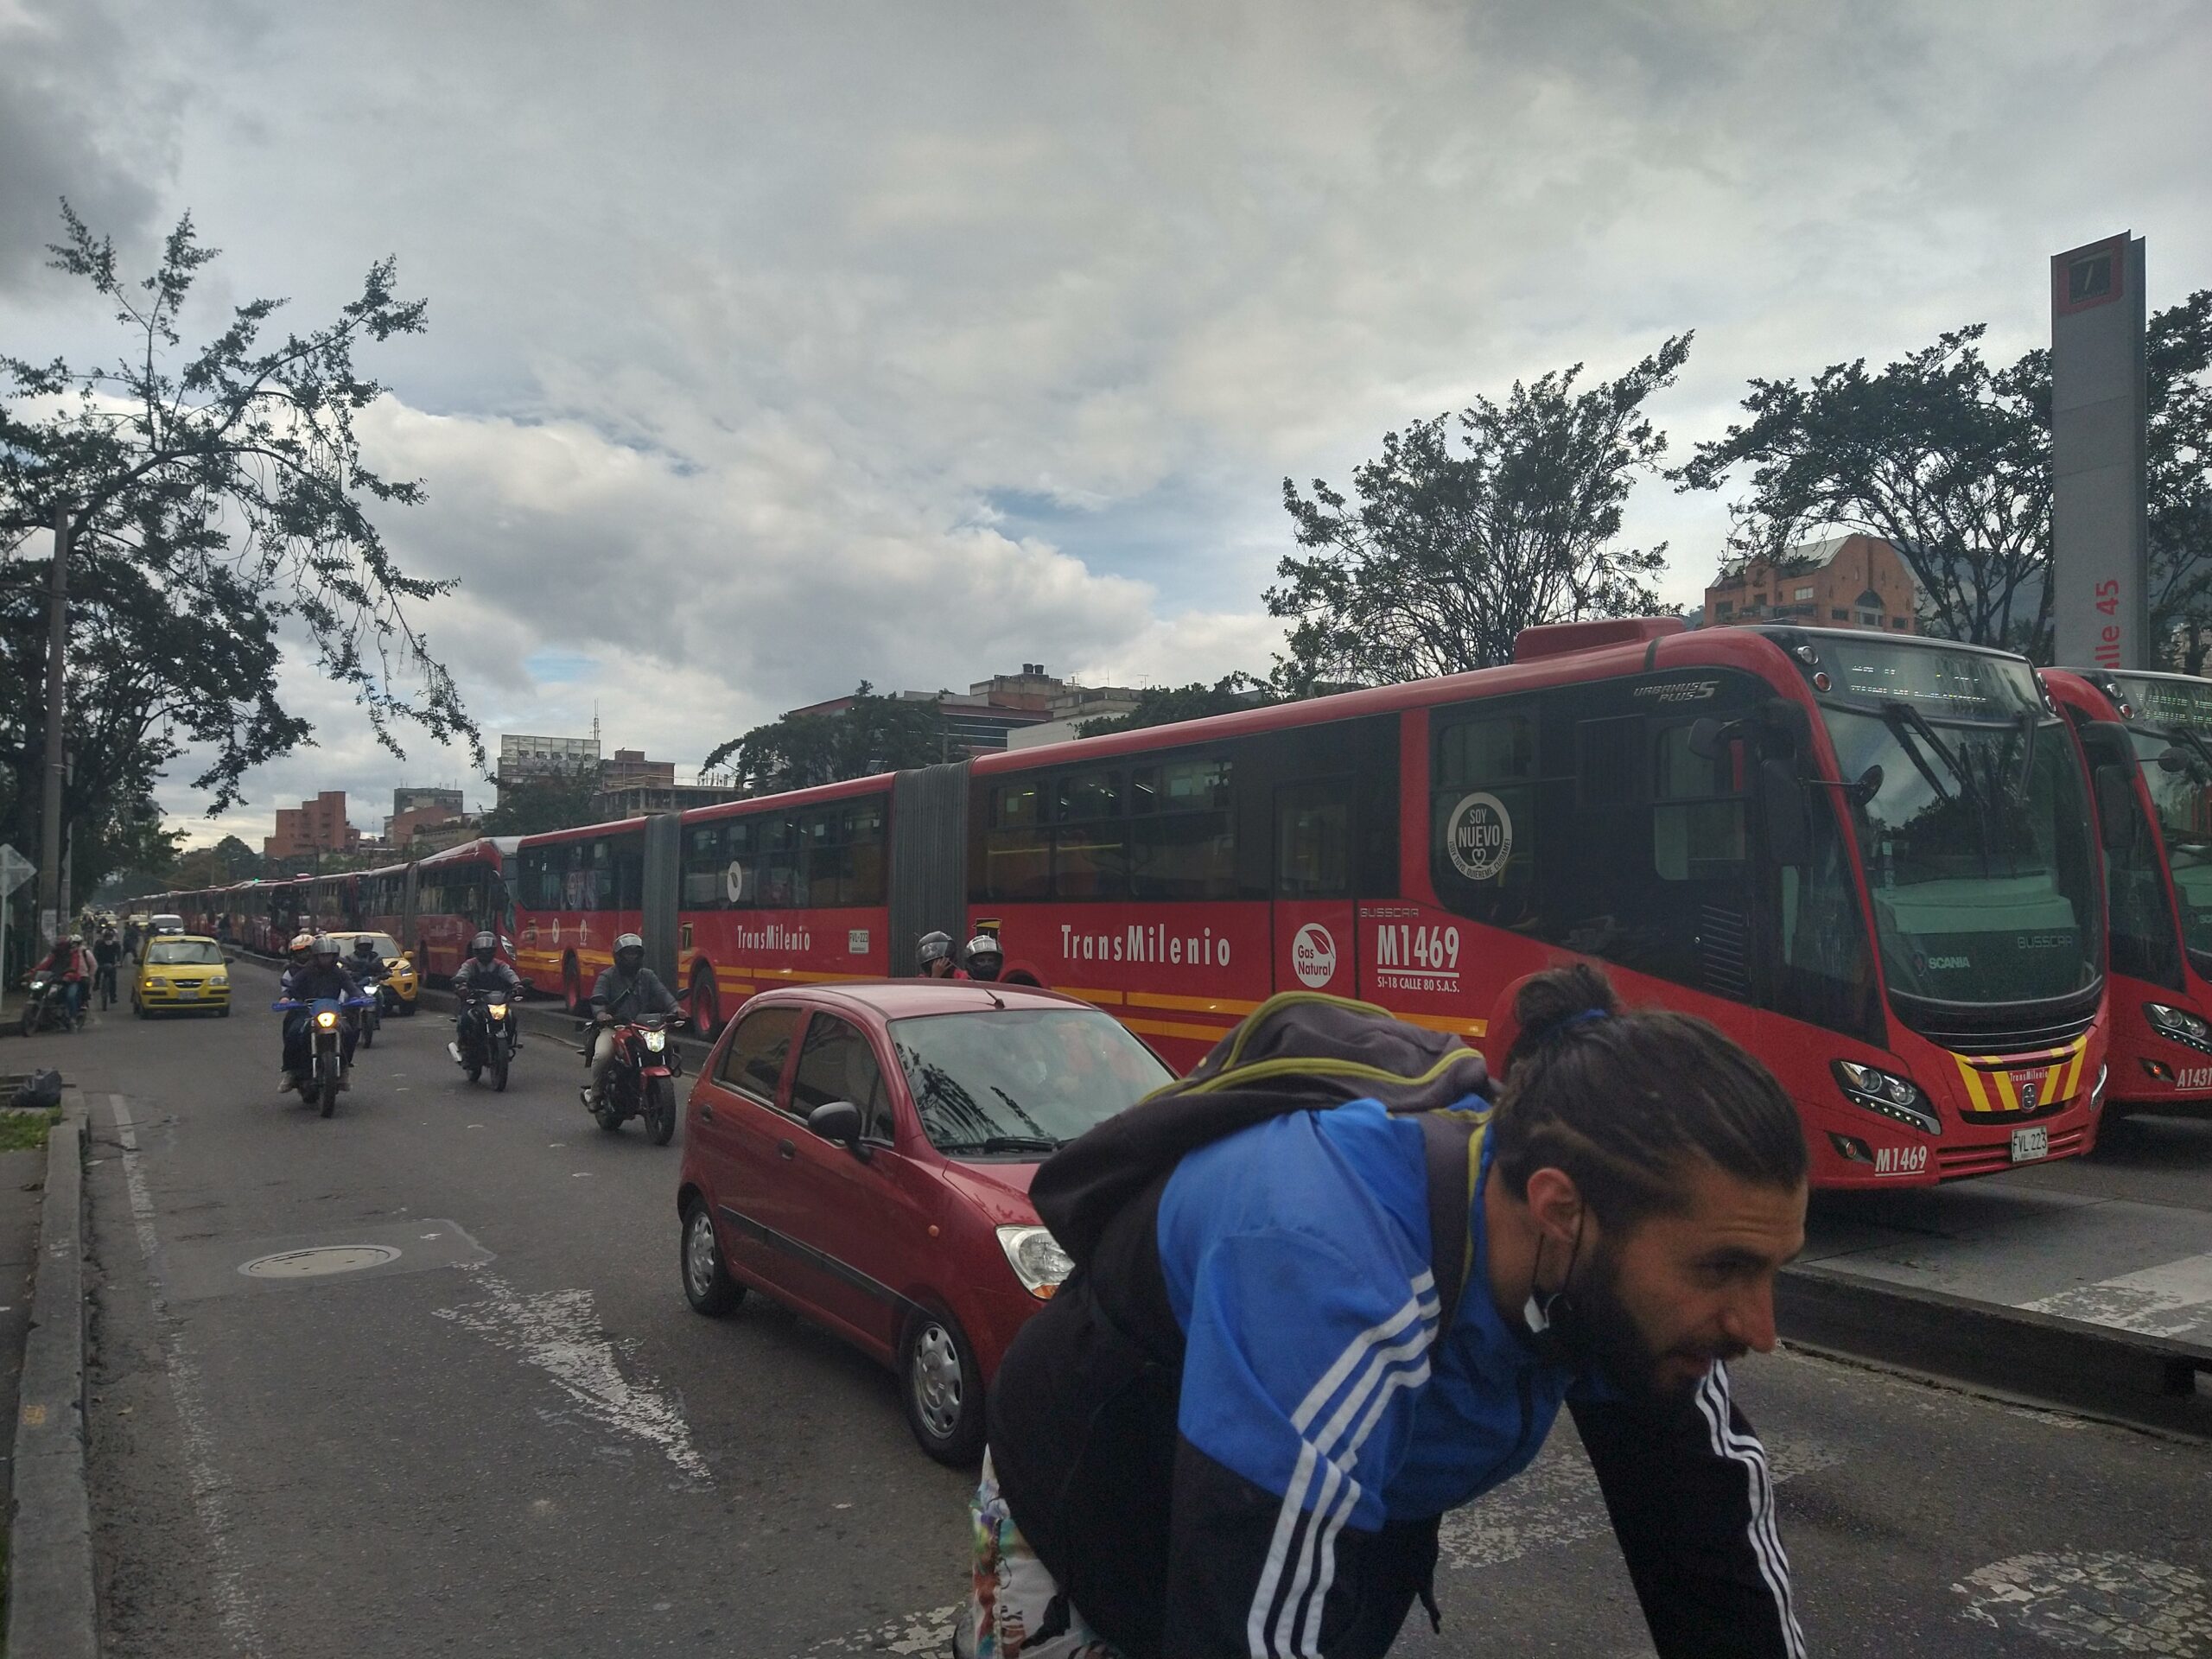 Various types of transport in Bogotá together on a street